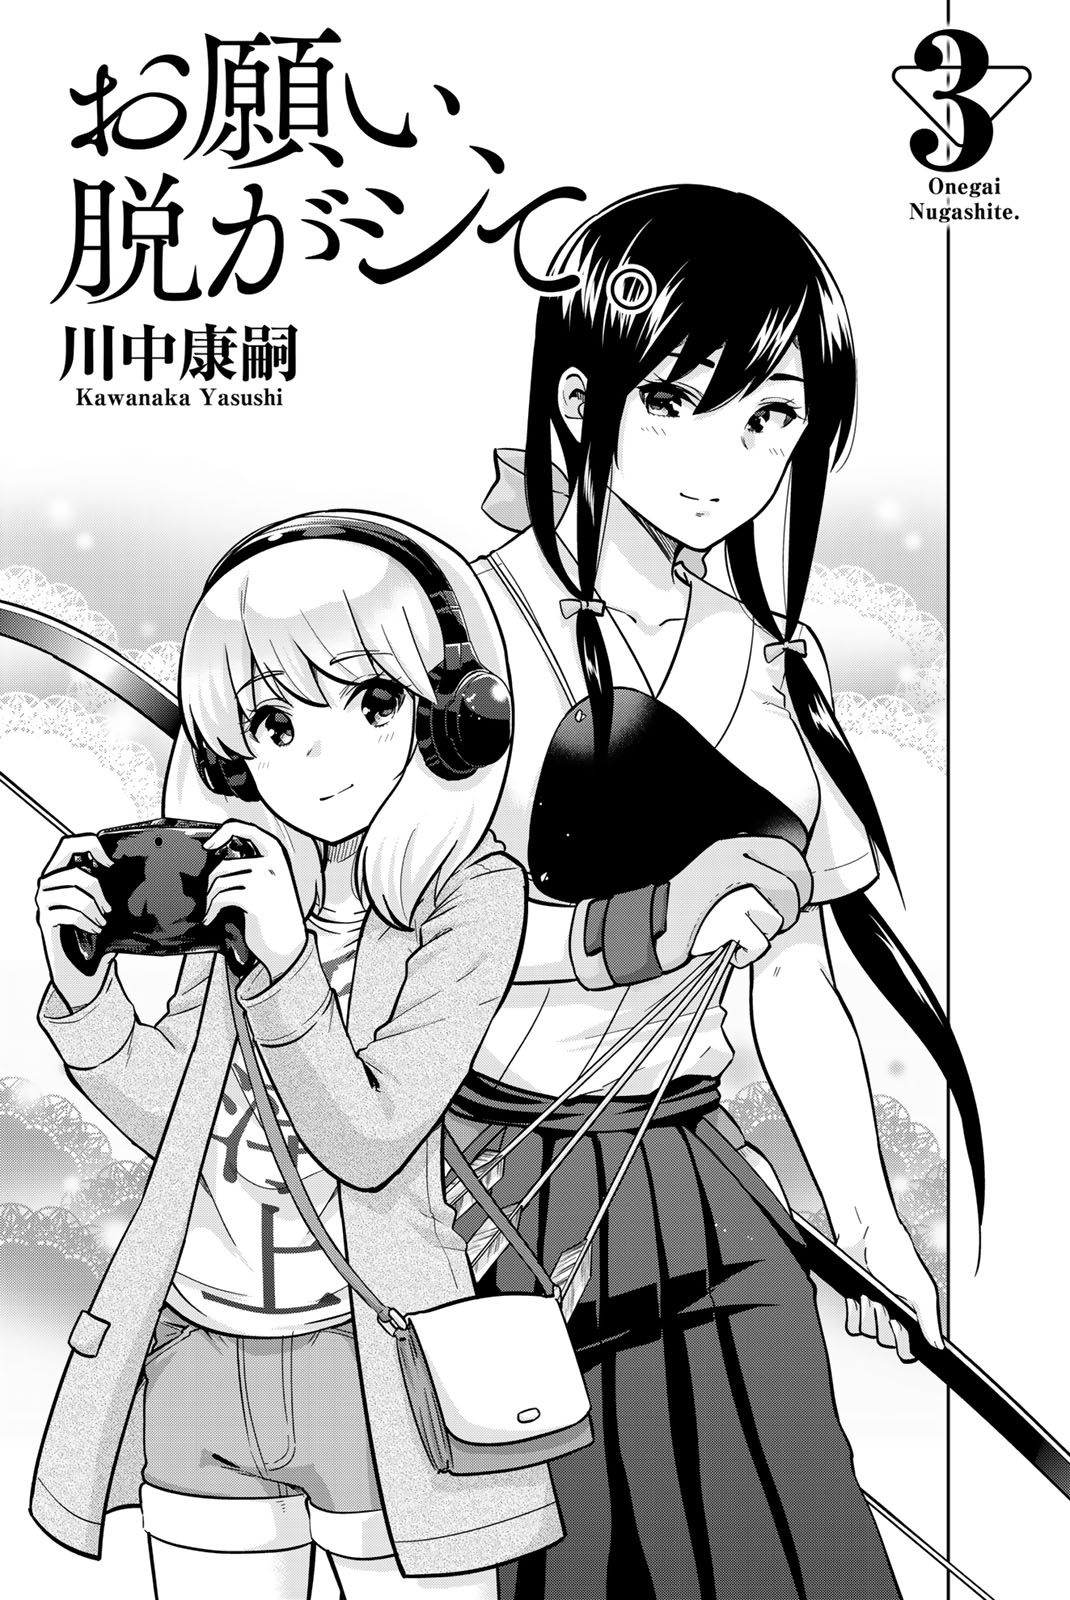 Onegai, Nugashite. Vol.3 Chapter 19: There's No Way My Sister Is This Shy - Picture 3